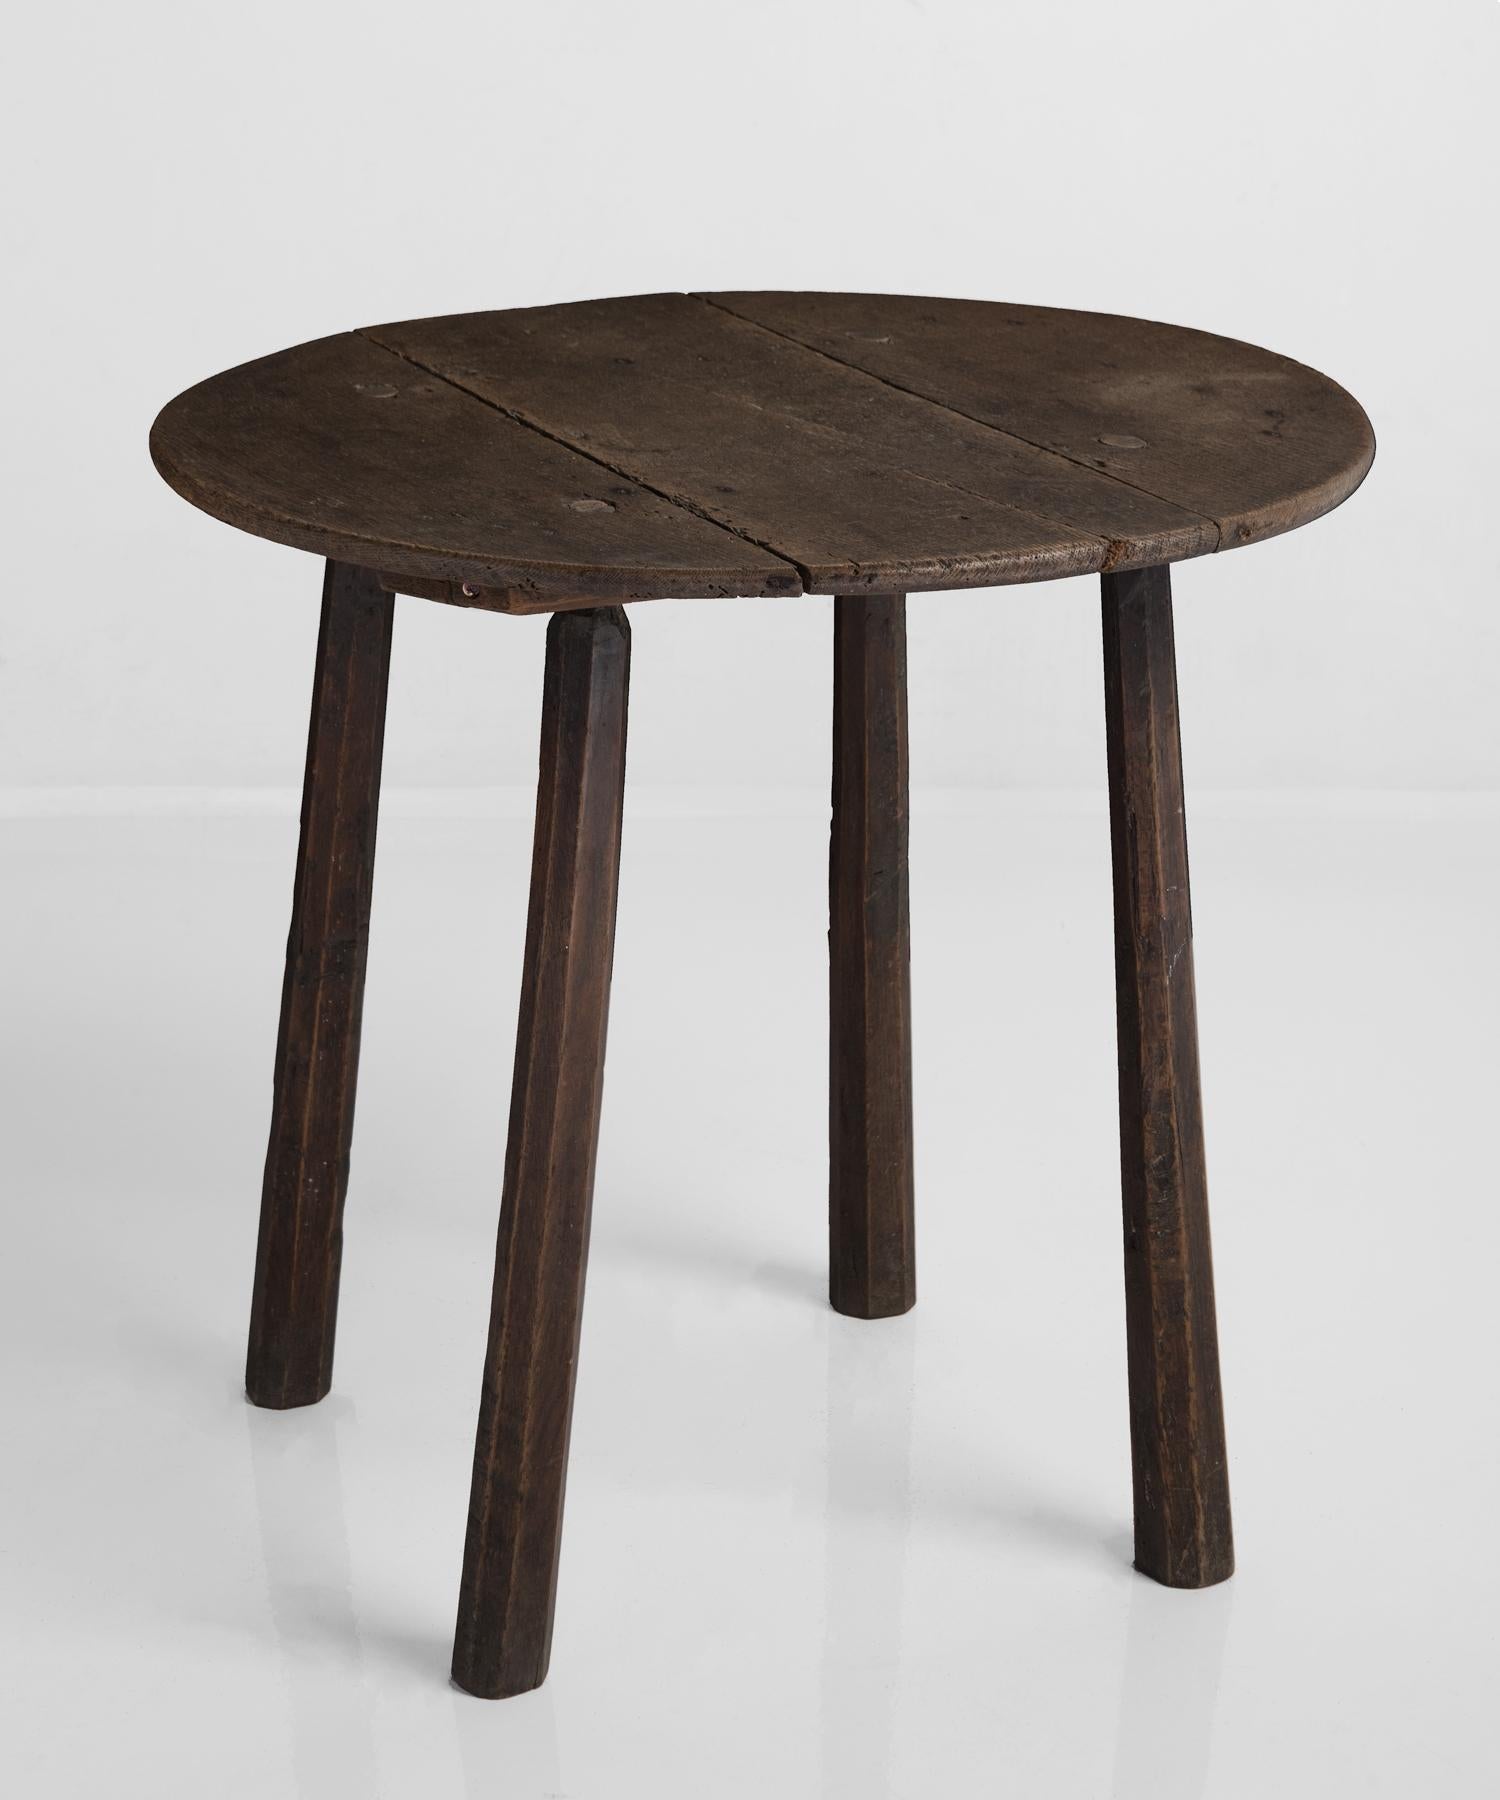 Cricket table, England, 19th century.

Minimal, primitive form with stick legs and rich patina.
  